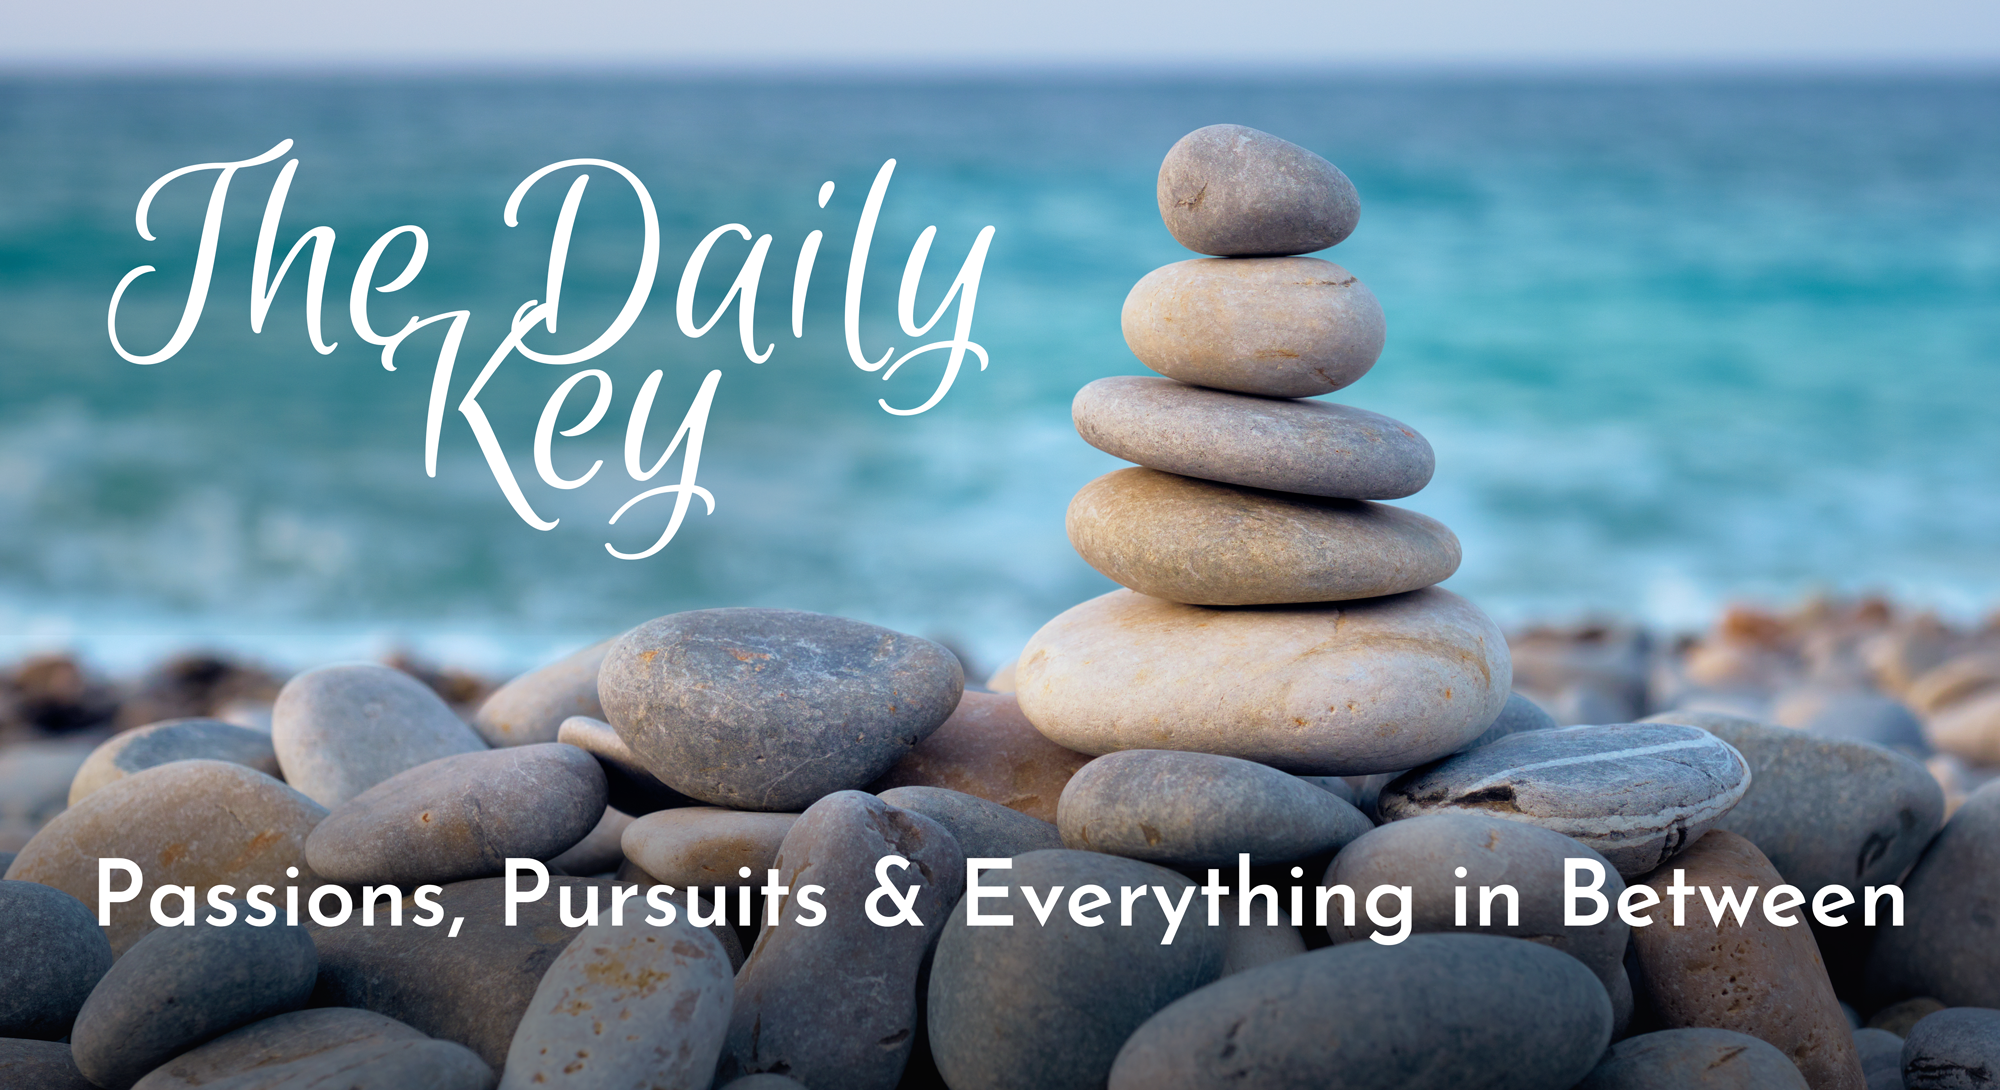 The Daily Key